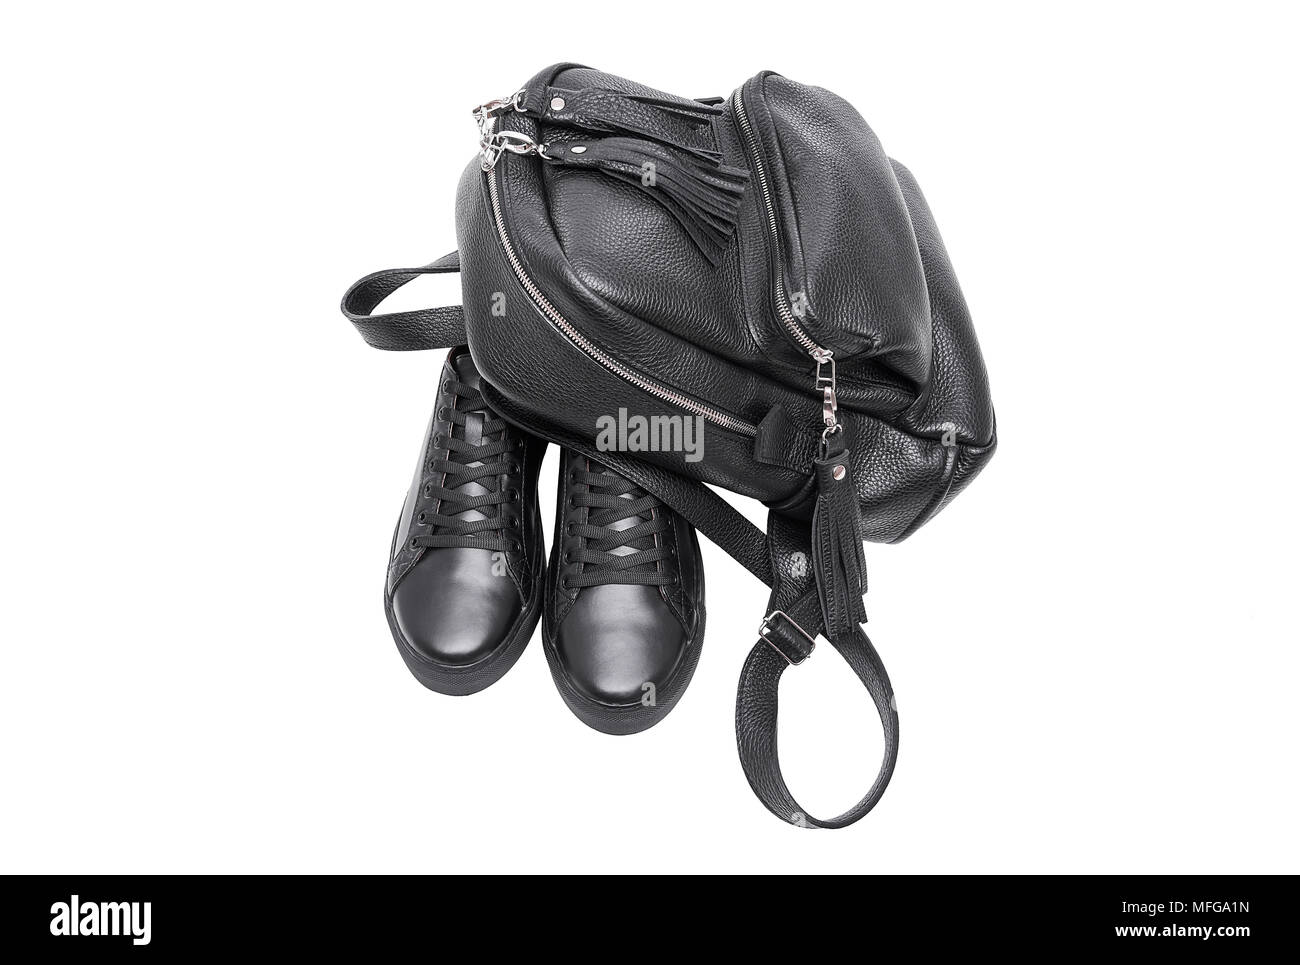 Shoes and leather backpack. Stock Photo